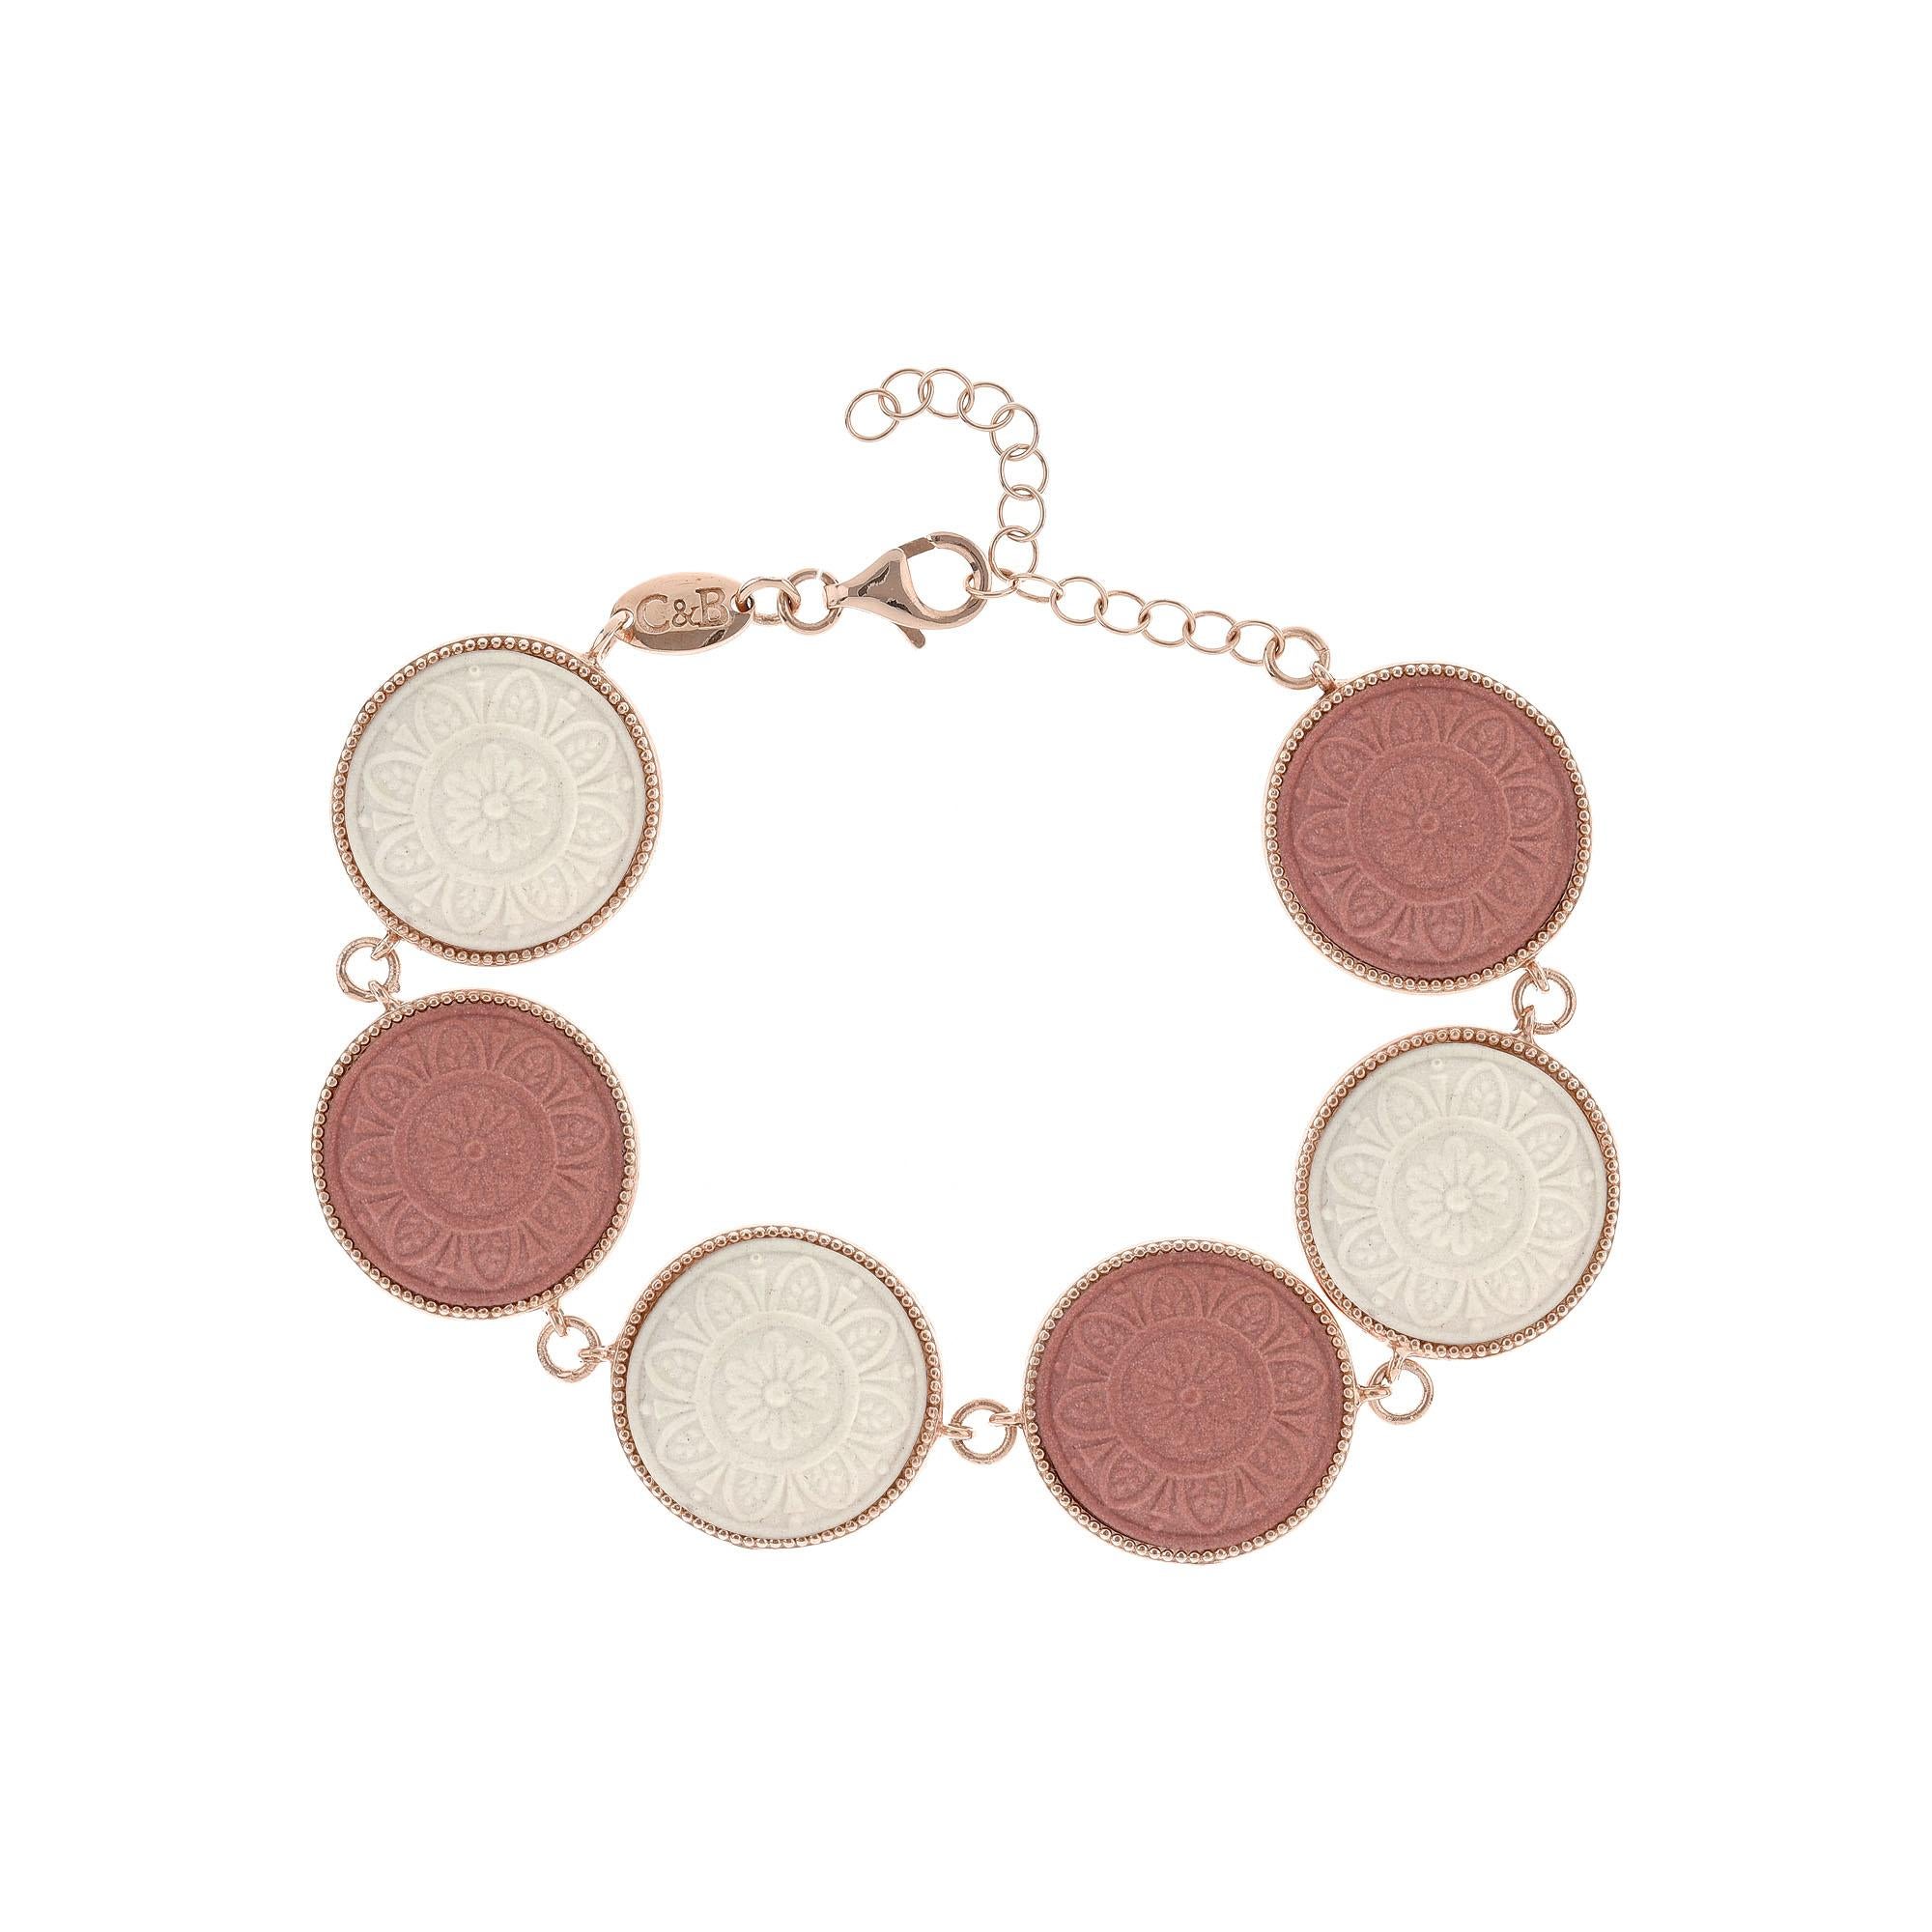 Beautifully hand crafted porcelain cameo bracelet mounted in 18k rose gold vermeil. In times past, cameos were mainly made of shells, hardstones, coral and volcanic rock, instead today the cameos which bears our family’s signature are made of fine